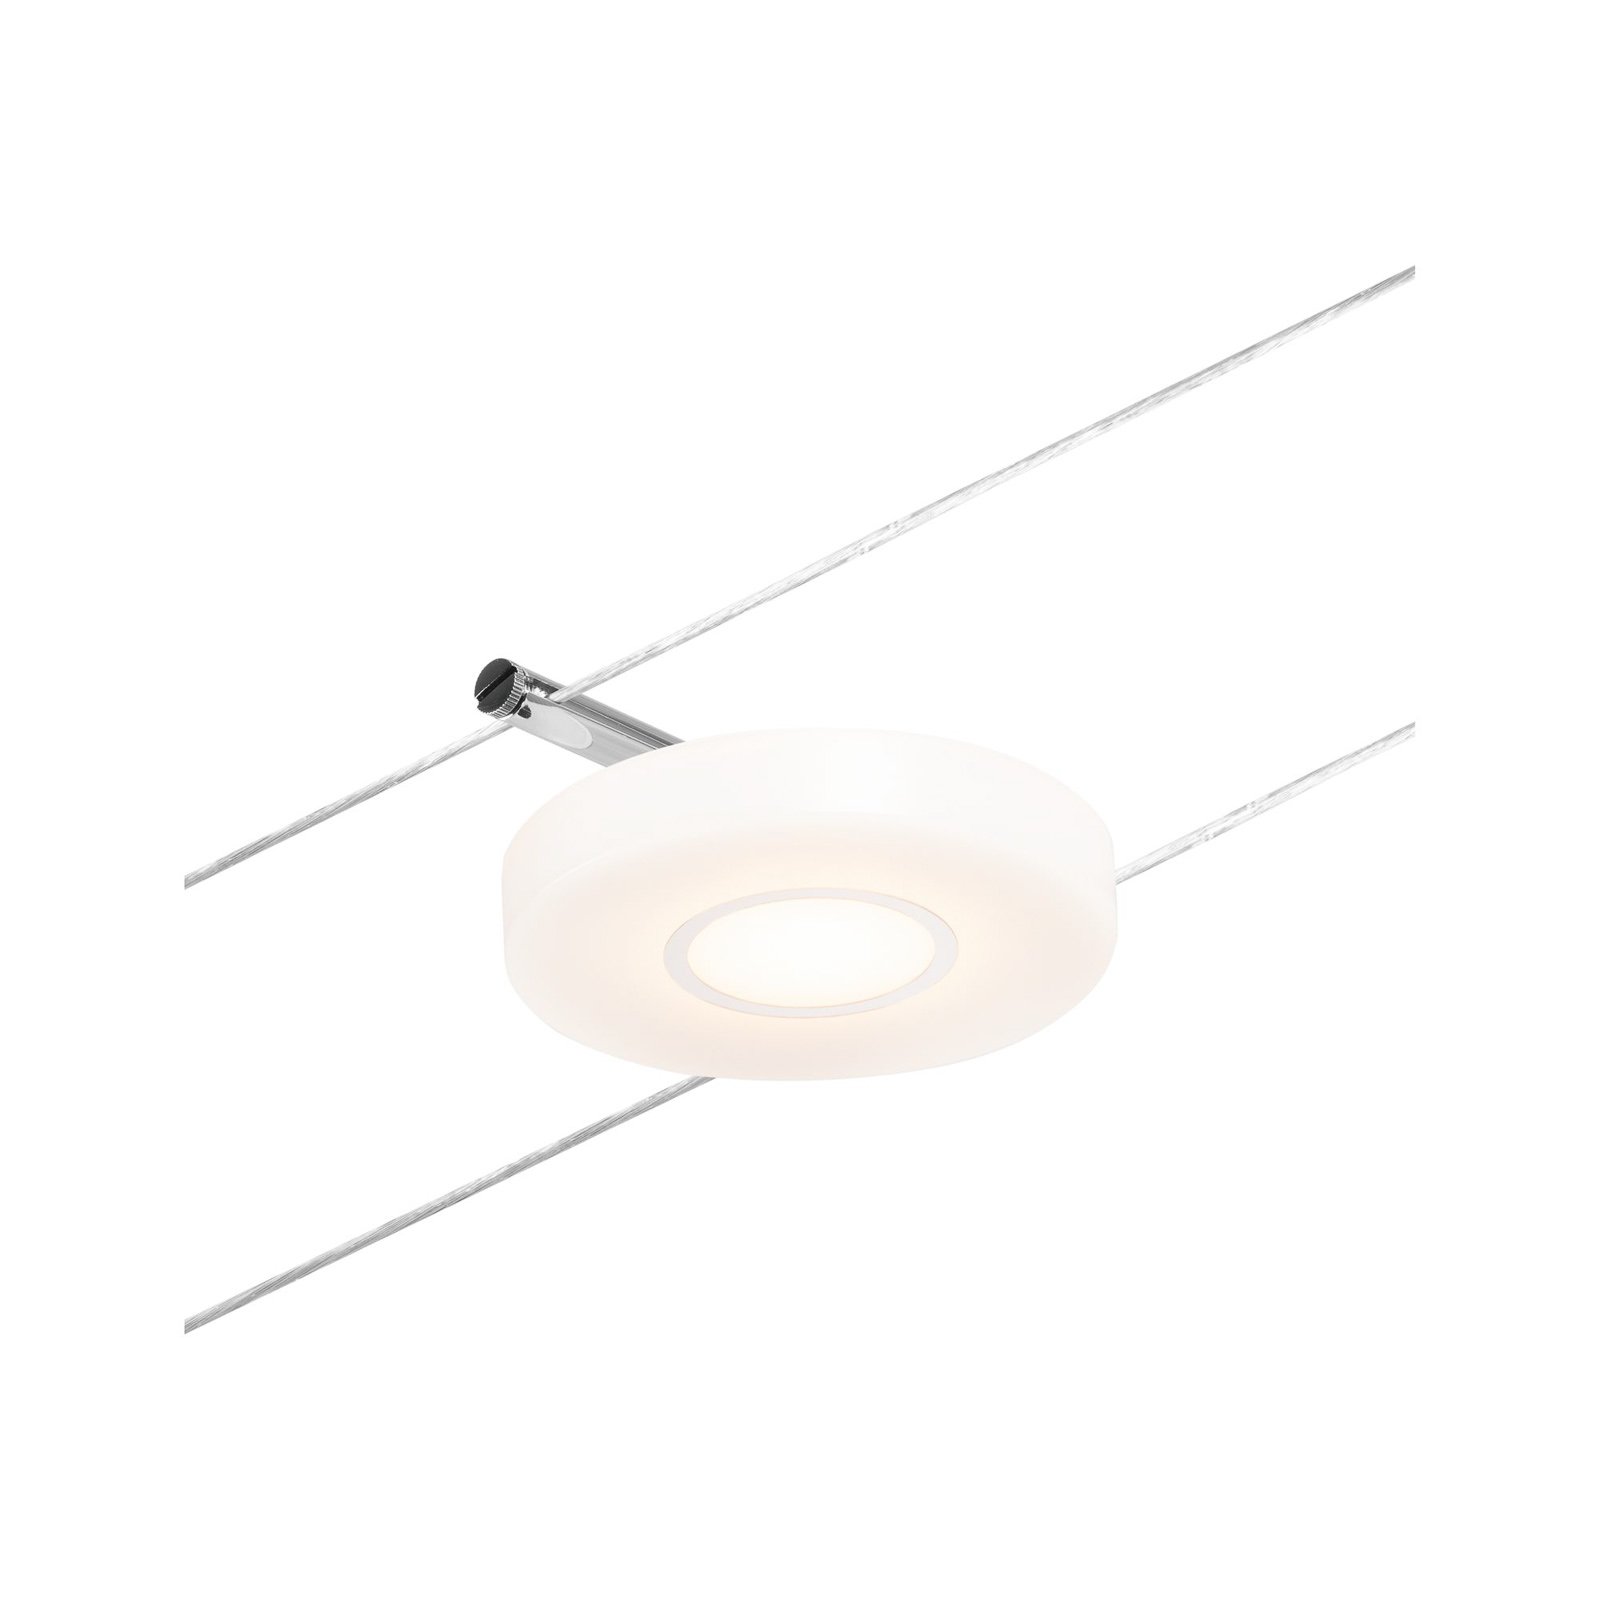 Paulmann Wire DiscLED LED spot kabelsysteem wit